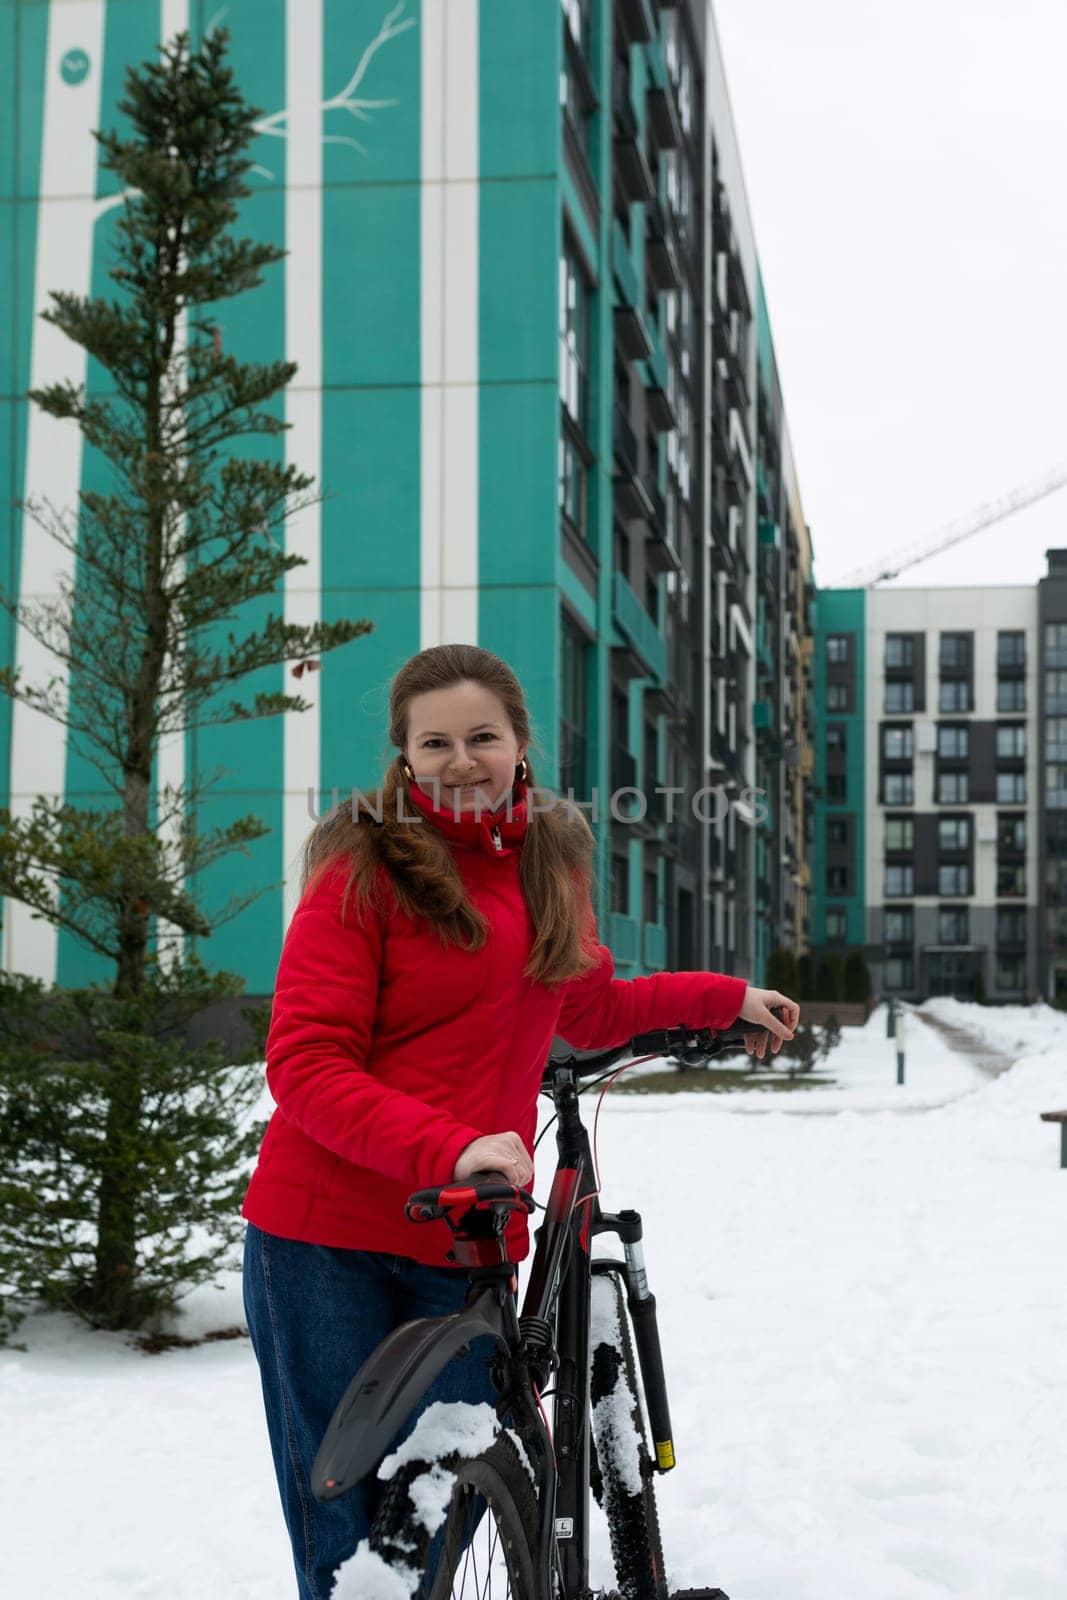 A young woman went on a winter bike ride around the city by TRMK